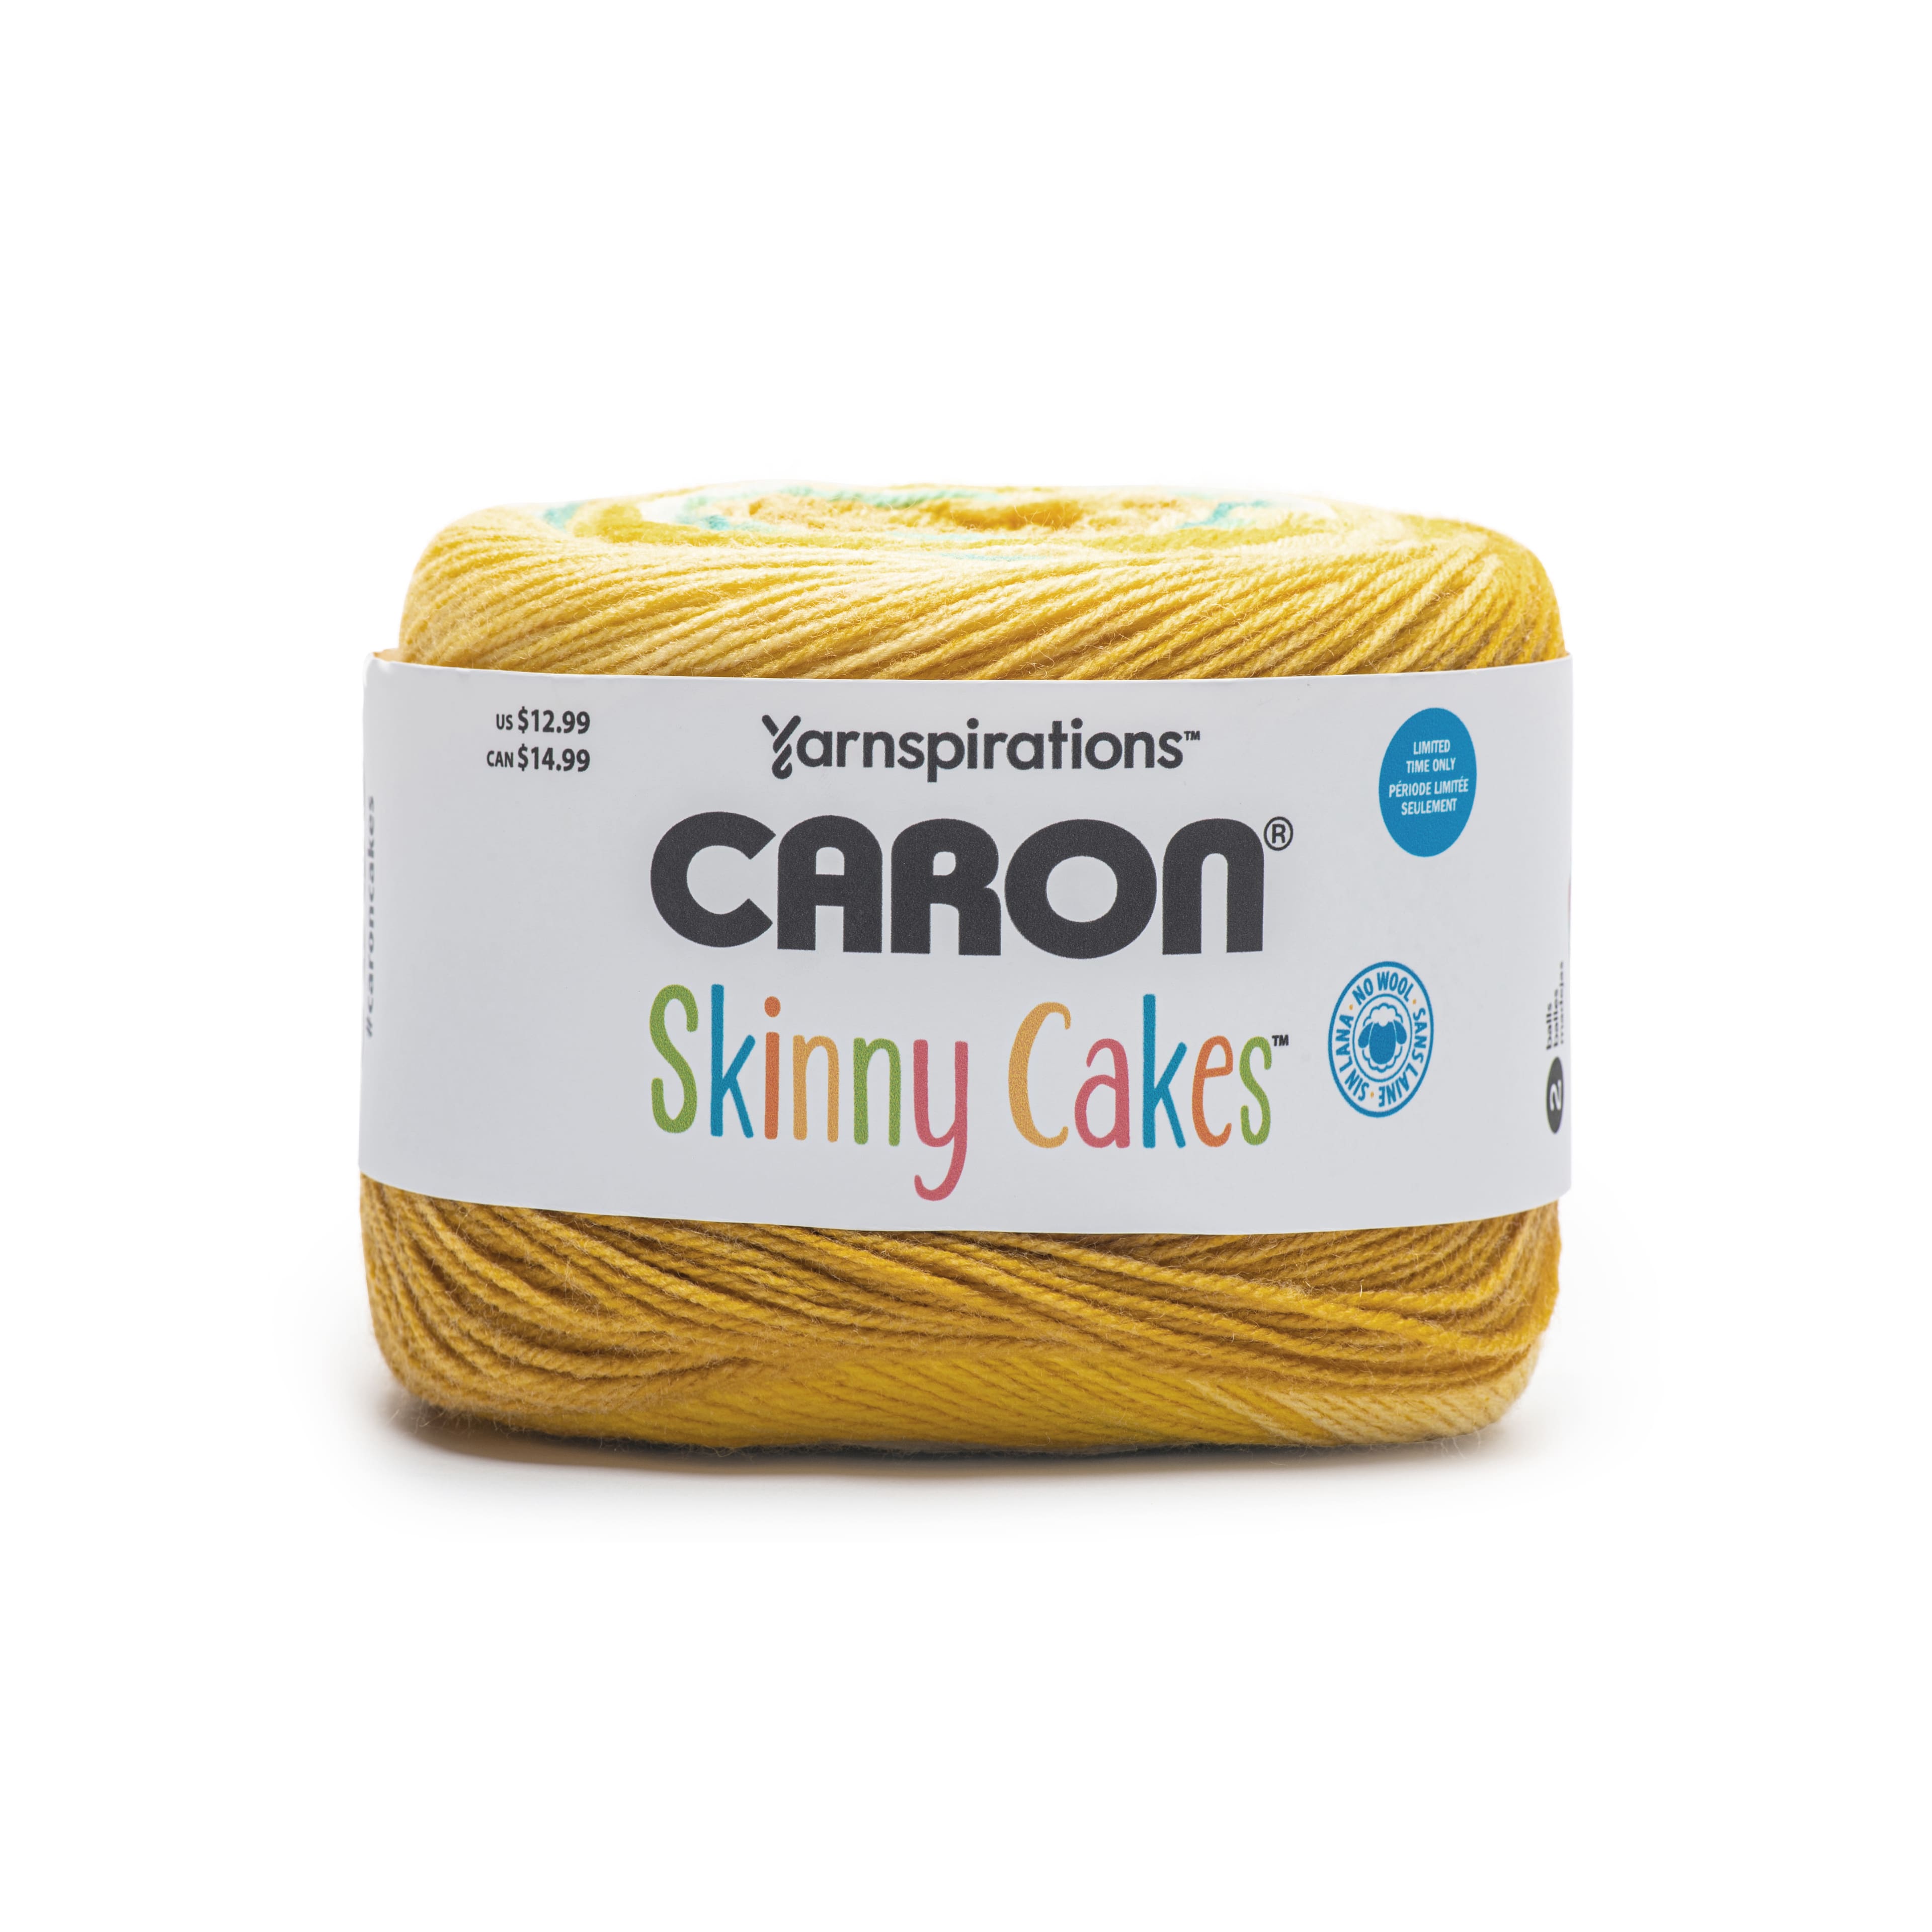 Lets Talk NEW YARN AGAIN / New Colors Caron Anniversary Cakes